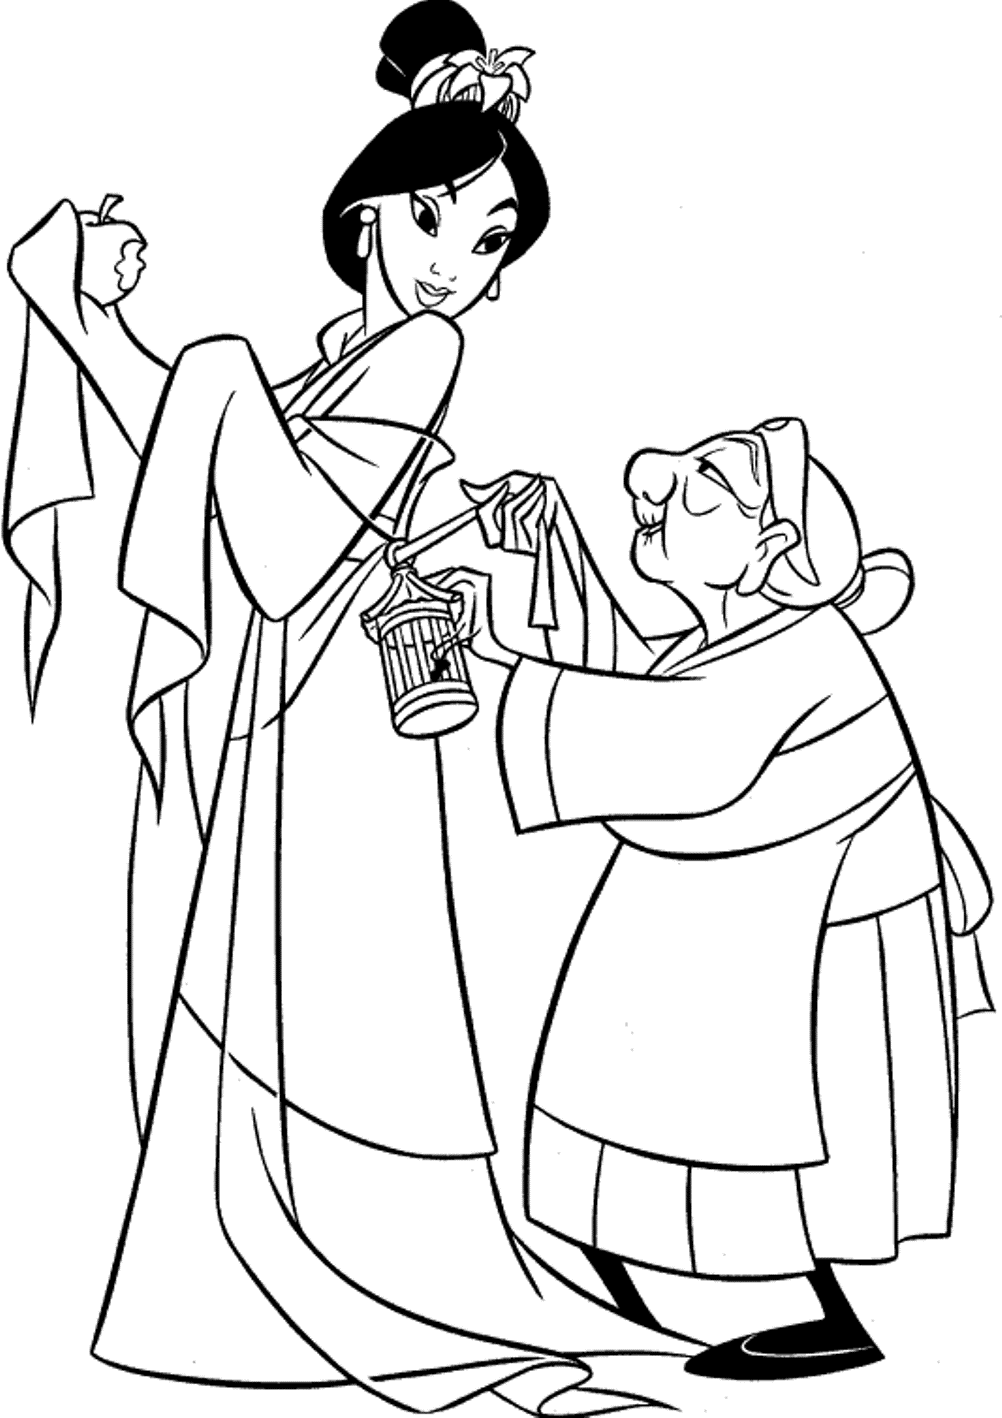 Mulan Coloring Pages Online Free - Coloring Home